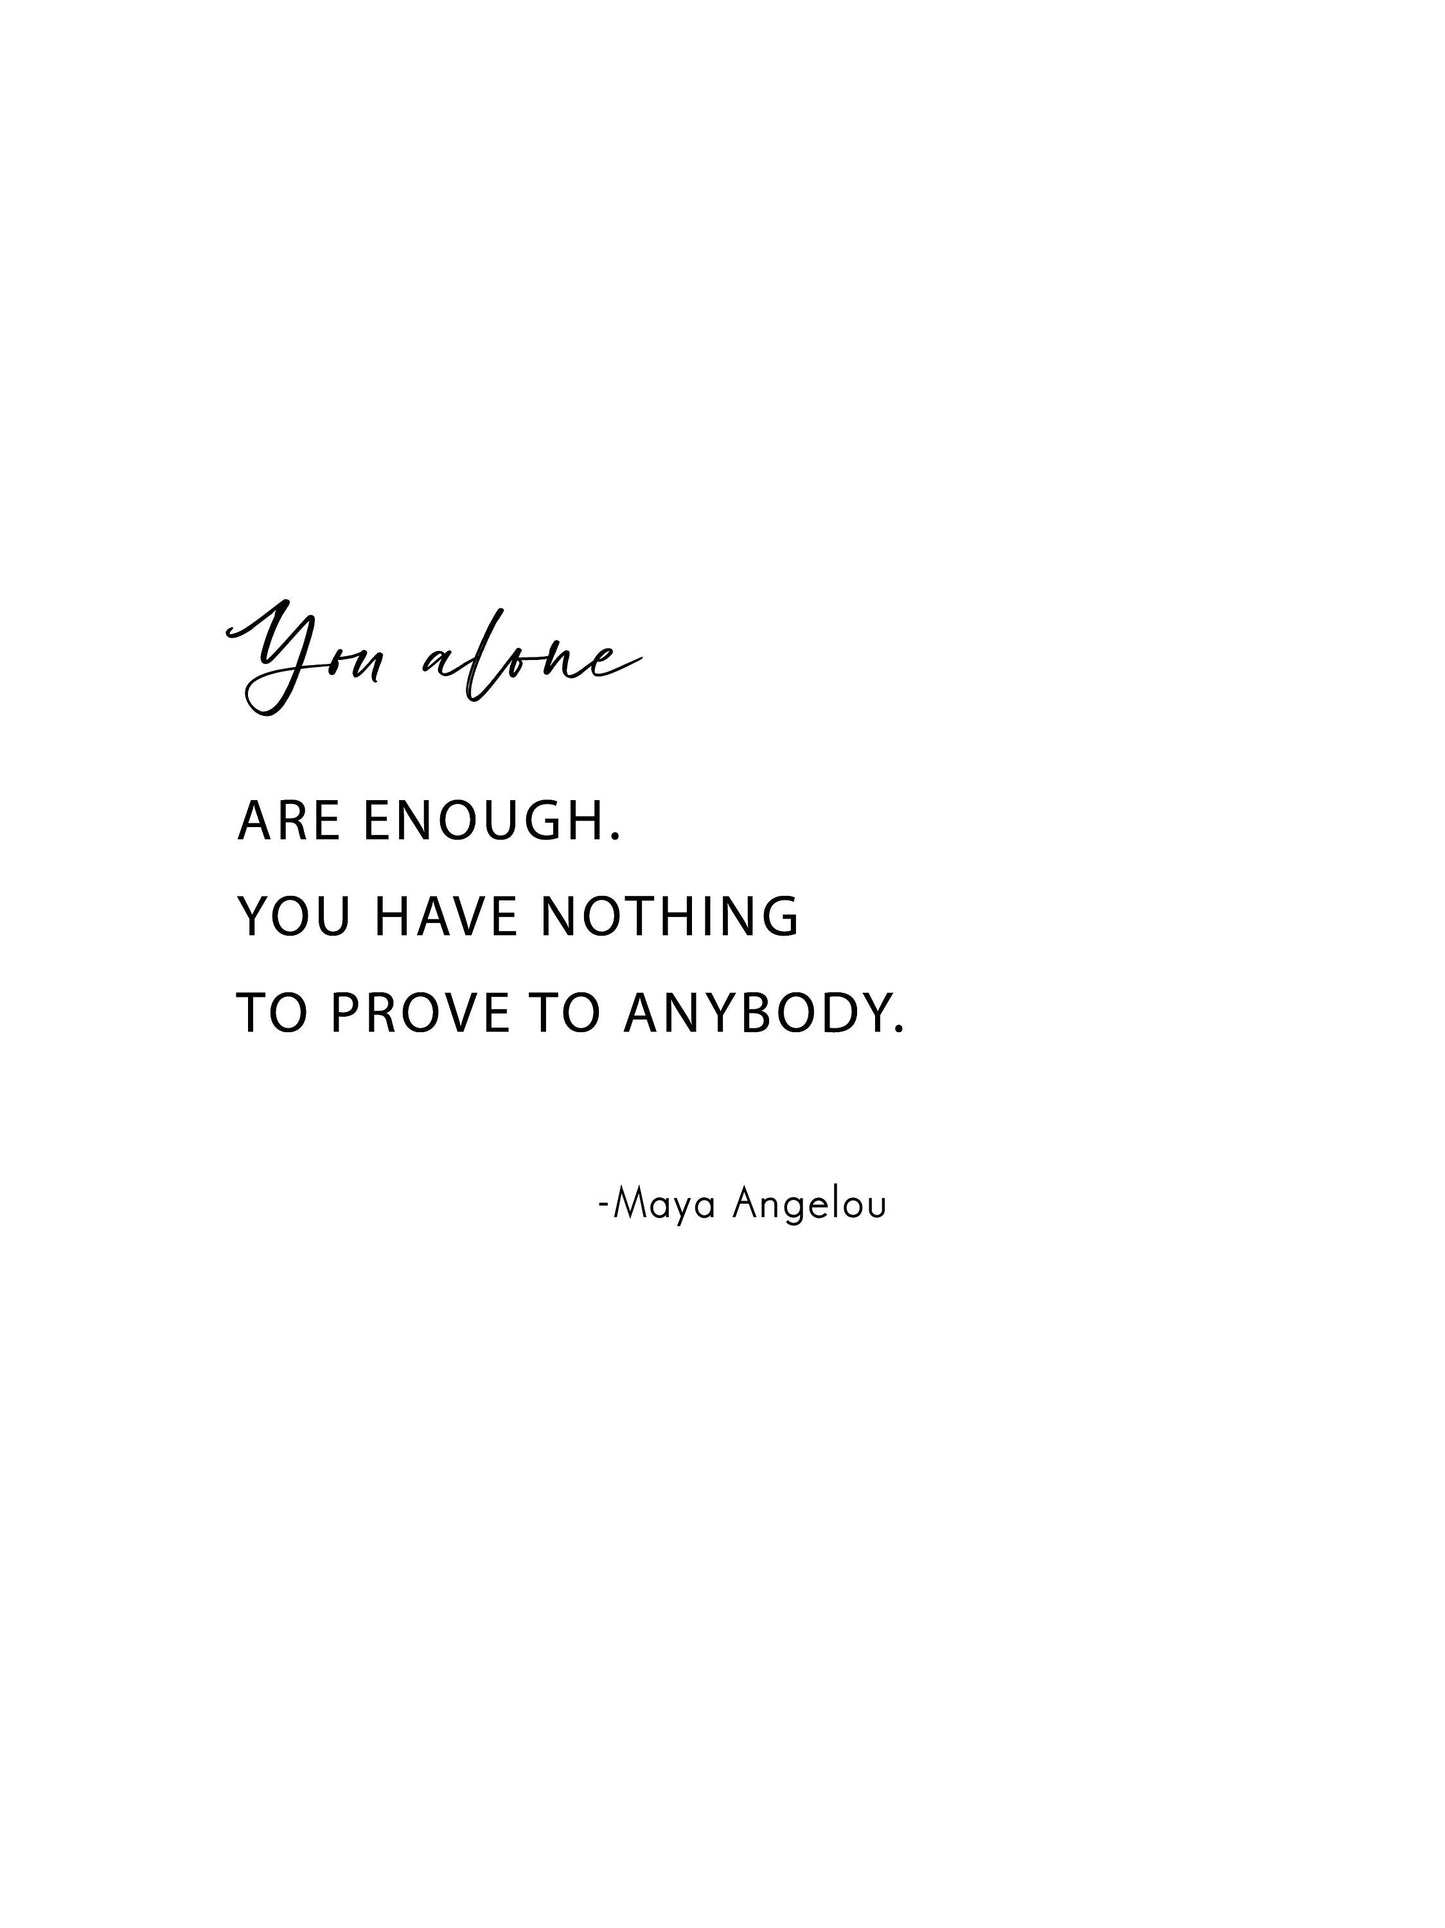 You alone are enough,You have nothing to prove,Maya Angelou quote,Inspirational print,Wall decor,Maya Angelou print,Office wall art,Minimal